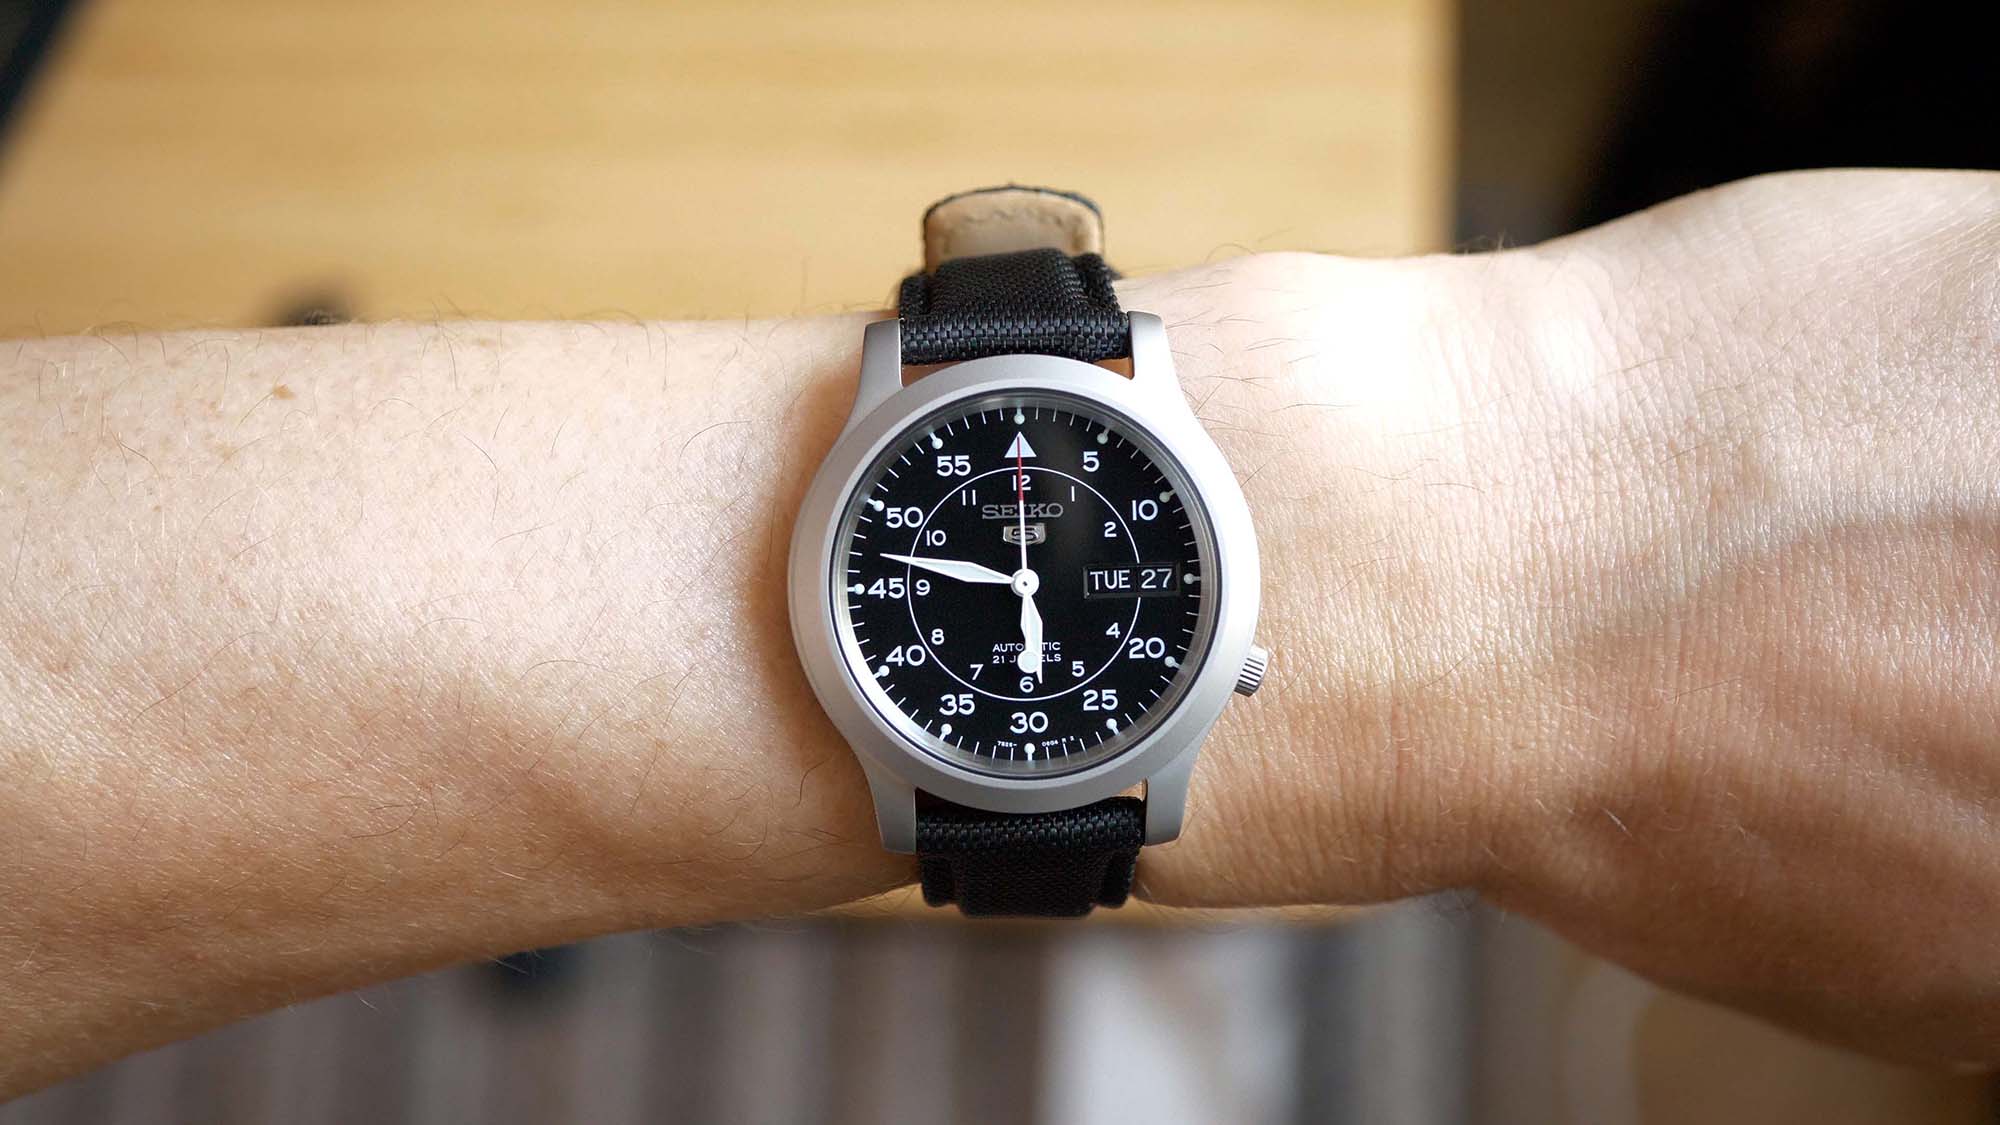 Seiko SNK809 Review: The Best Affordable Automatic Watch